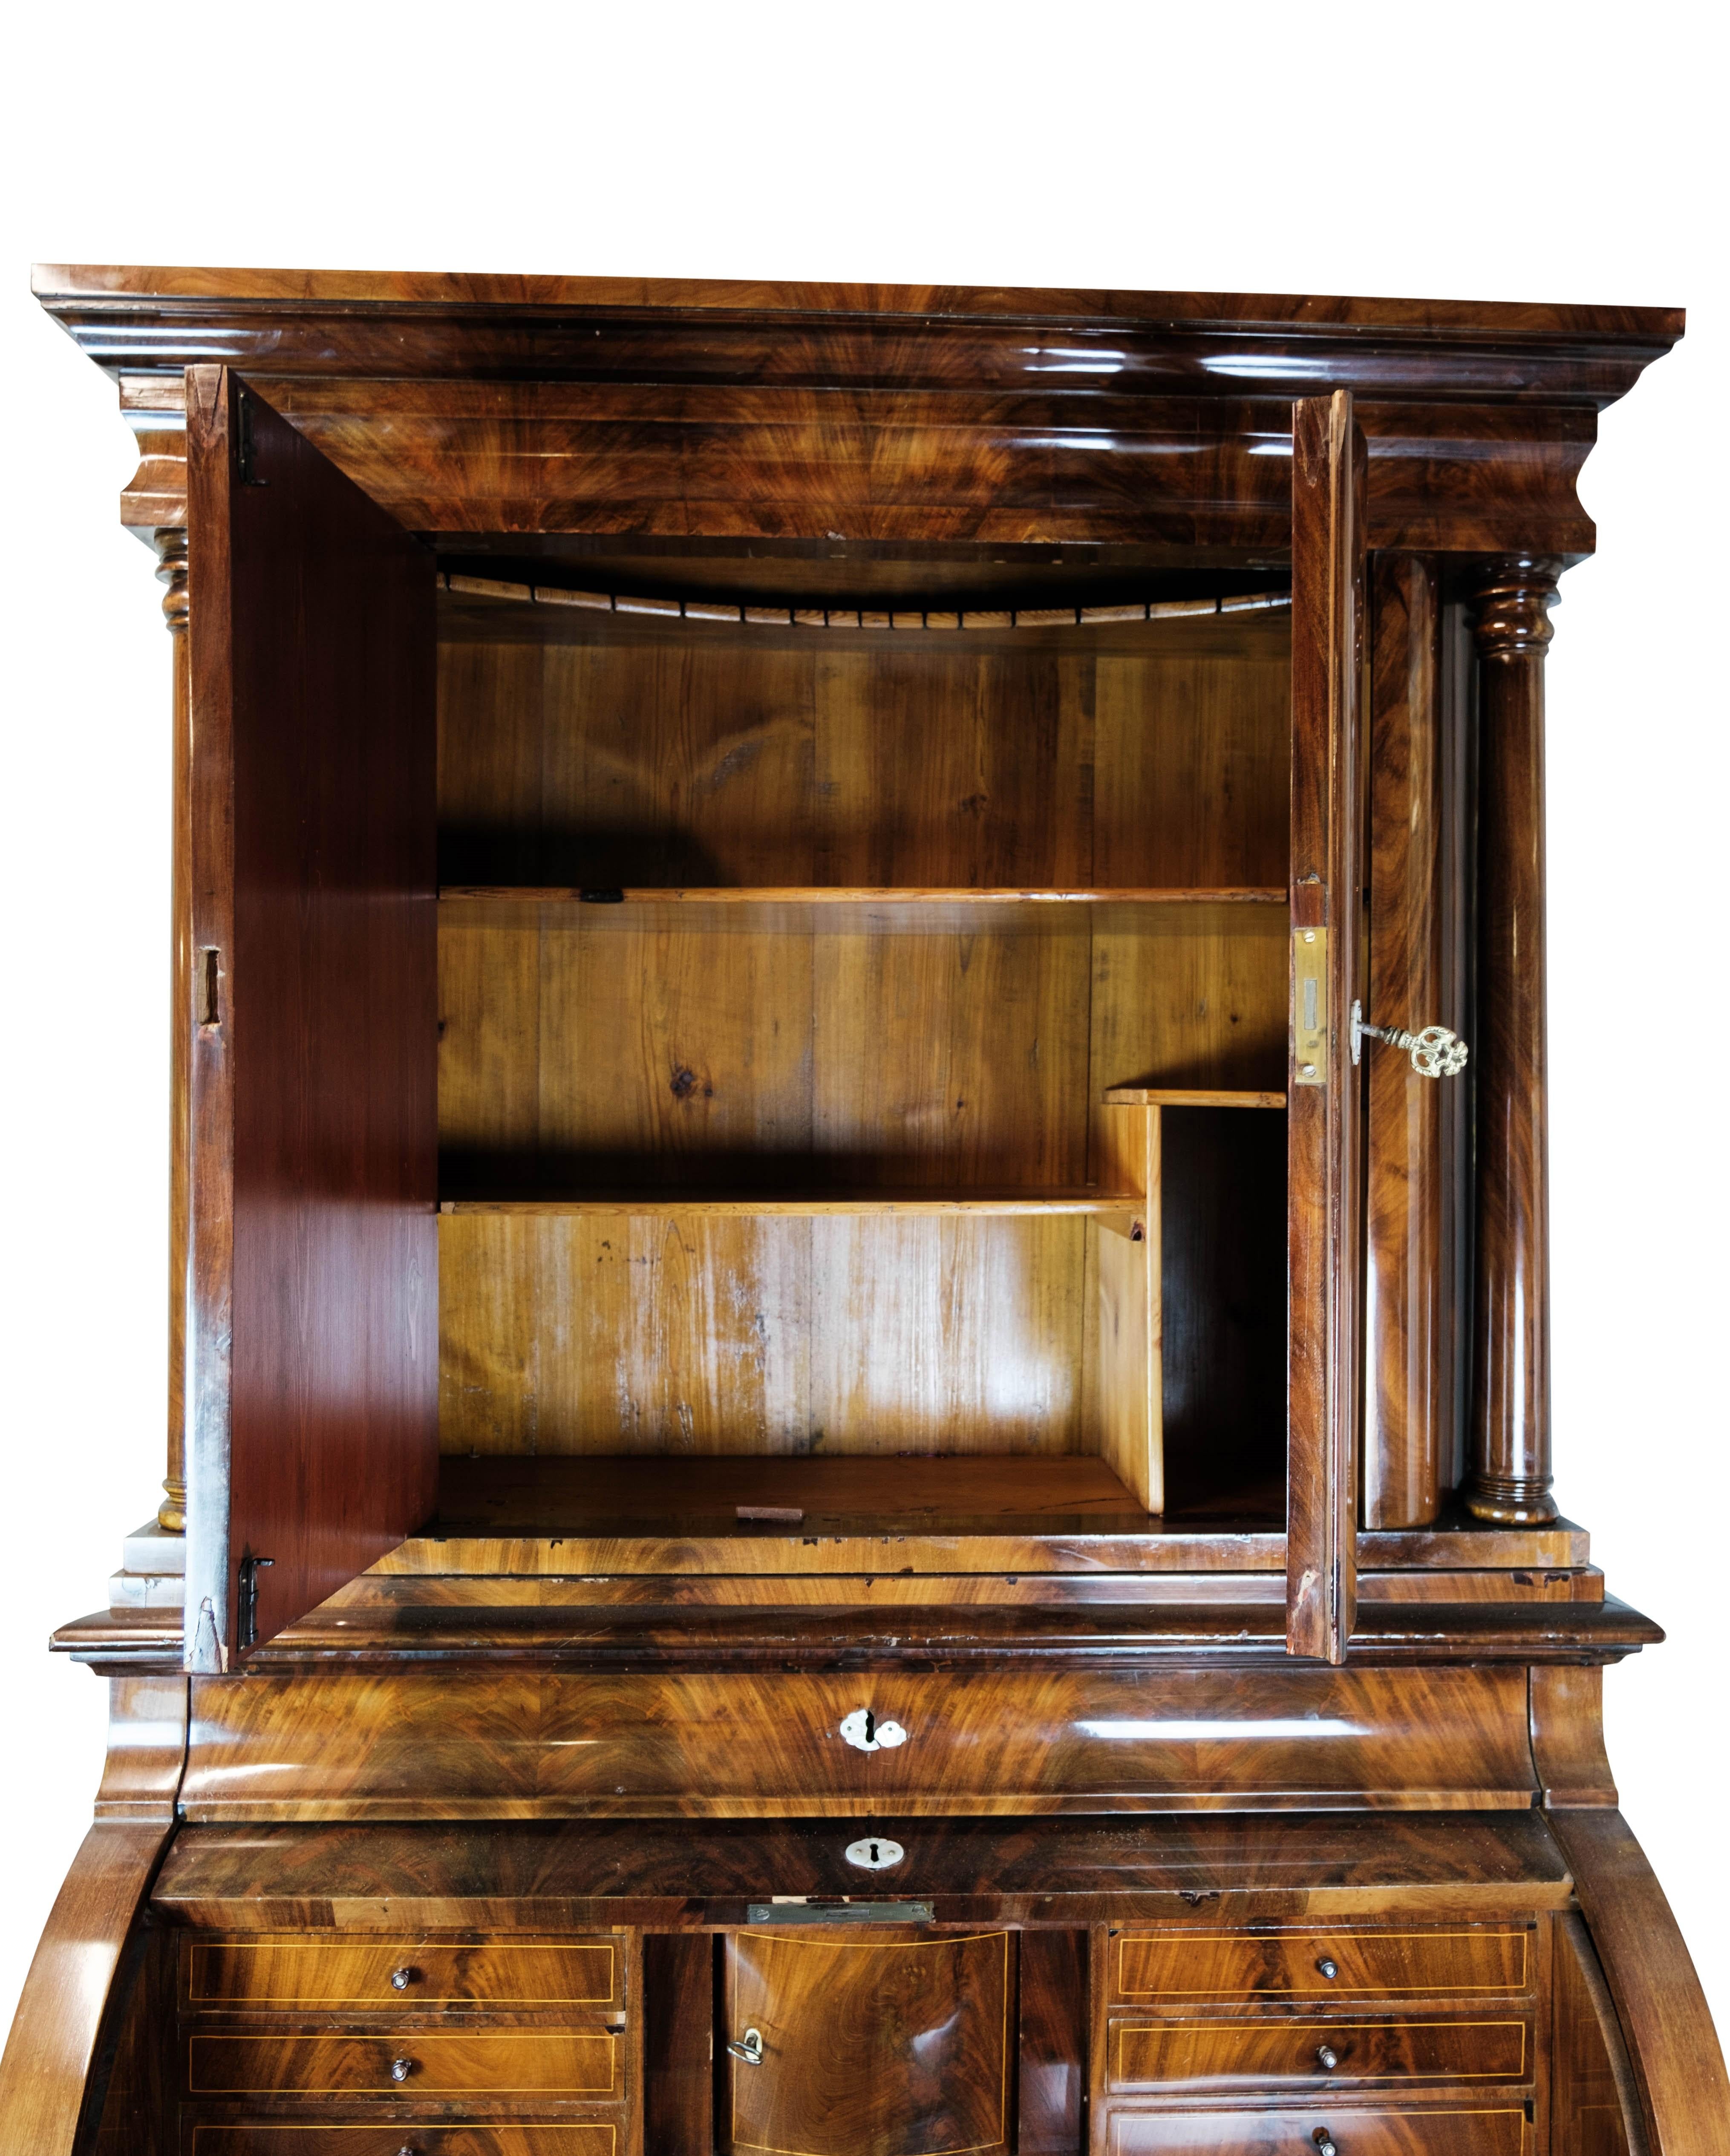 Other Large Bureau of Hand Polsihed Mahogany from Copenhagen in the 1860s